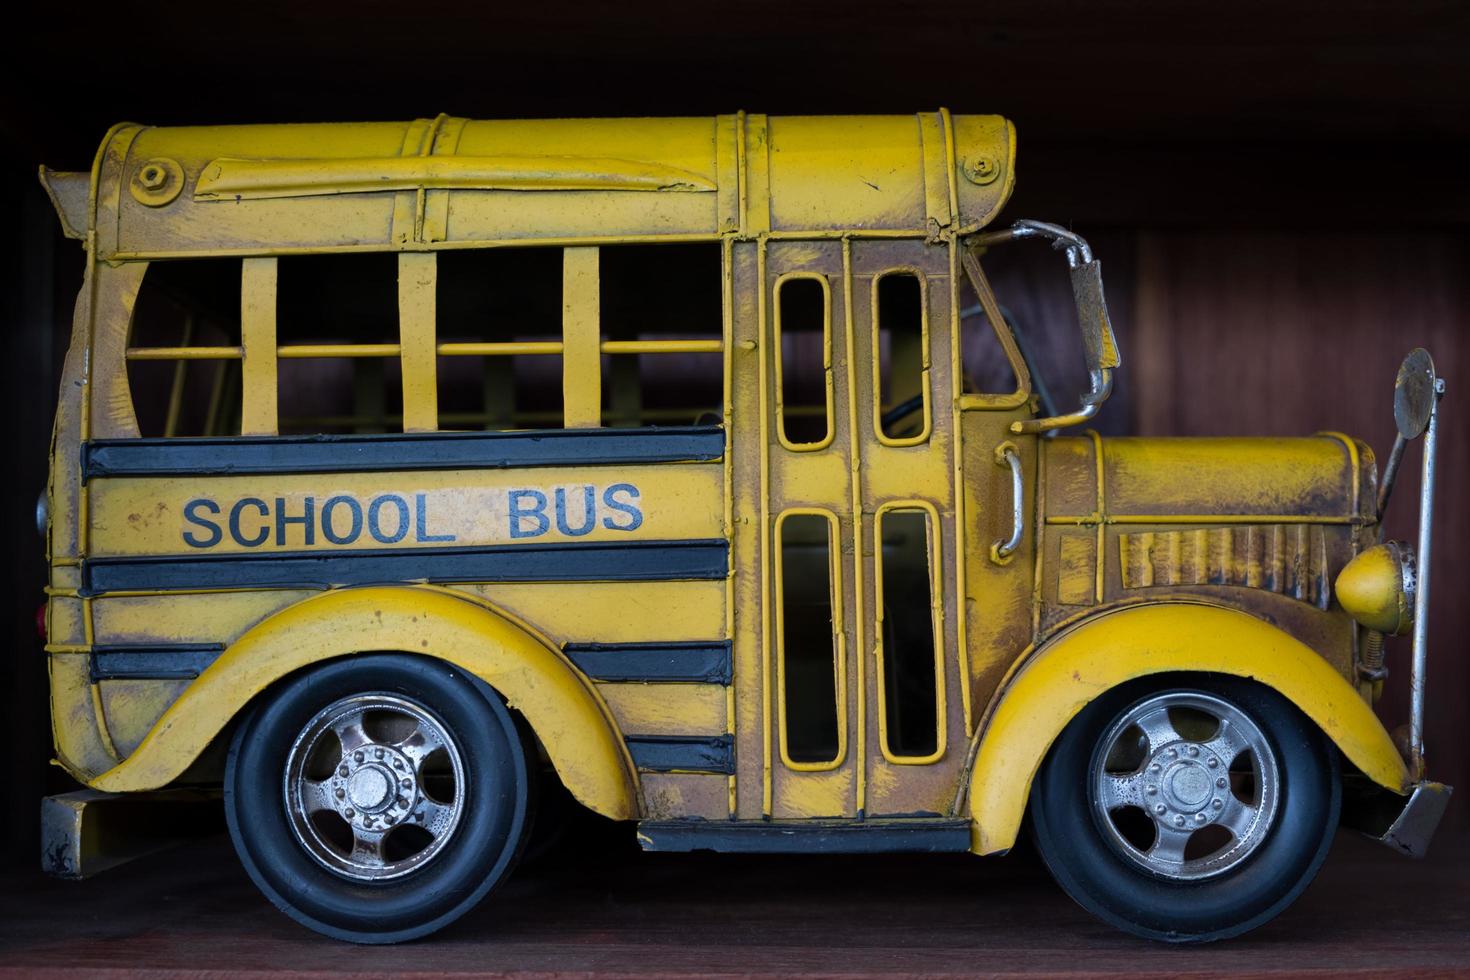 An old yellow school bus model photo